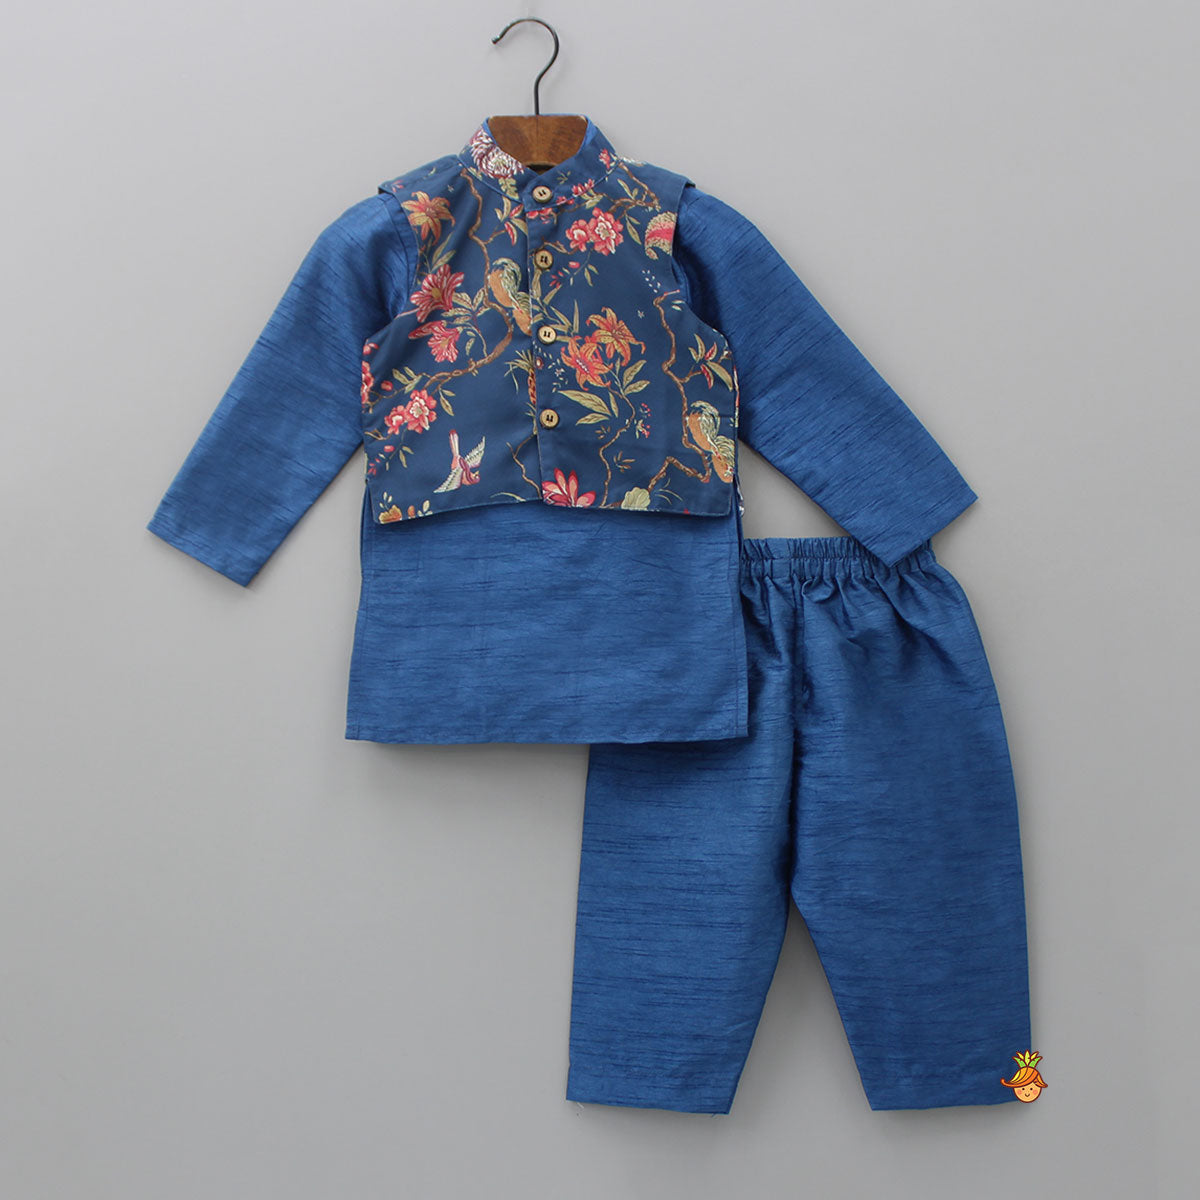 Blue Kurta With Flowers And Bird Printed Front Open Jacket And Pyjama